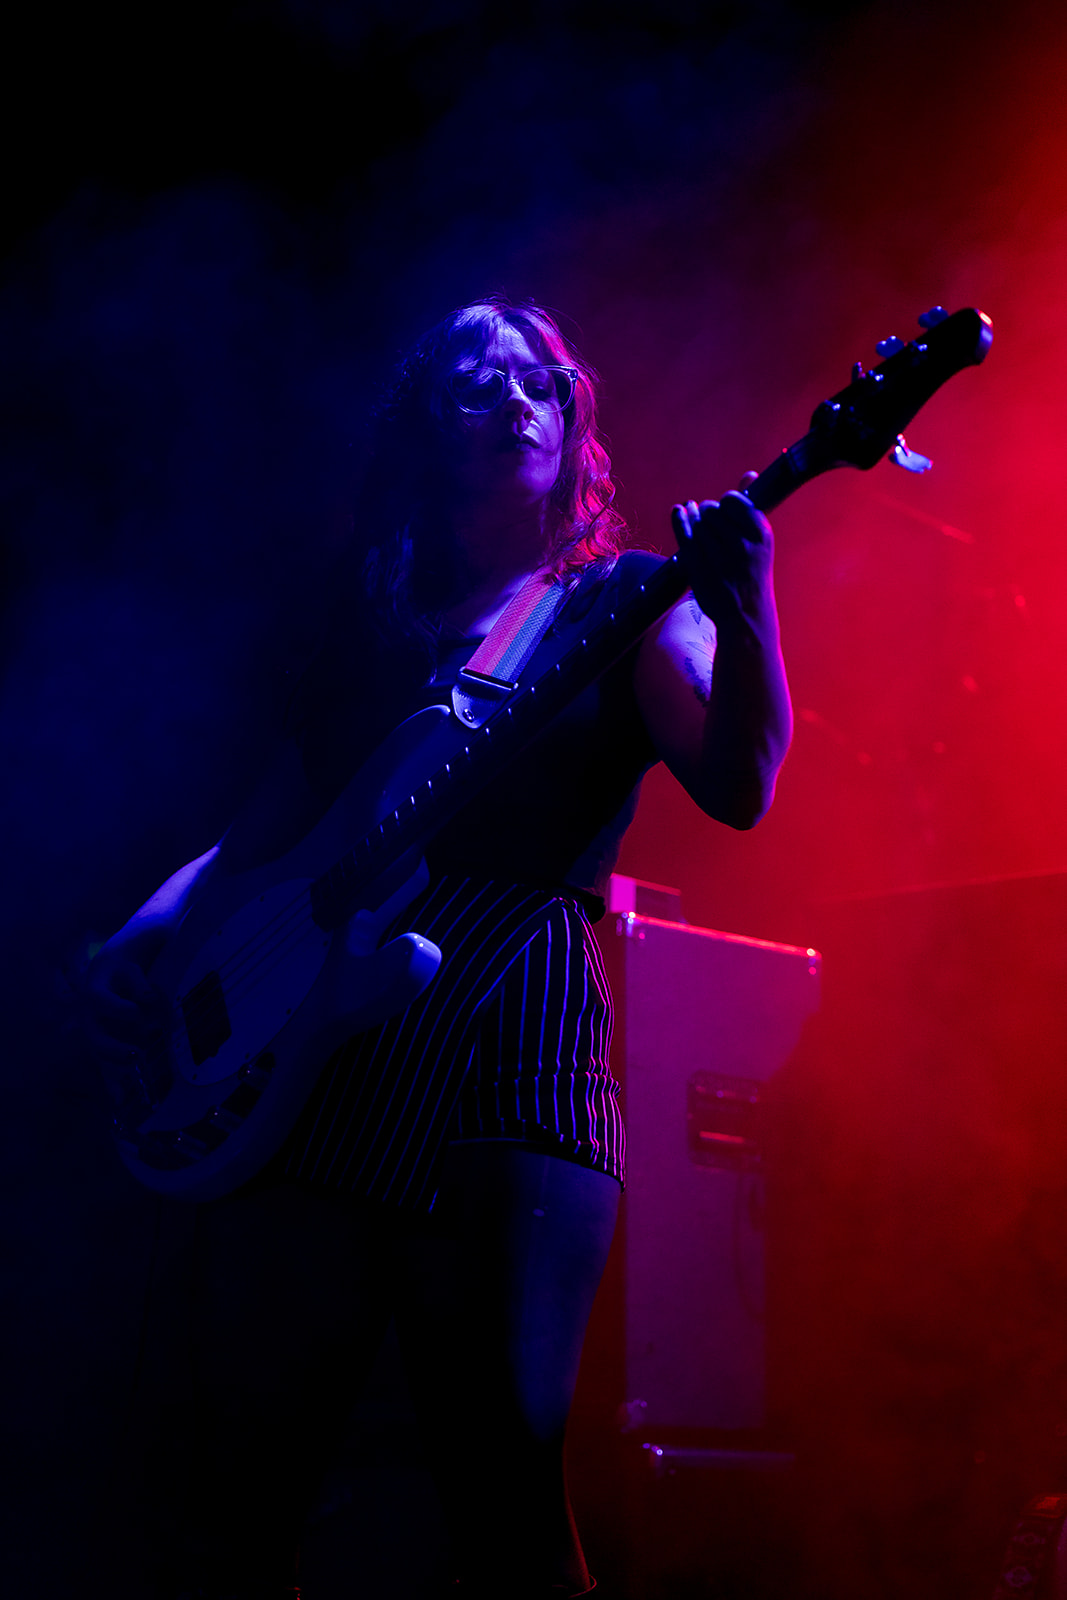 Holy Fawn bassist opens for Thrice on their Artists and The Ambulance 20th Anniversary tour at the Showbox in WA